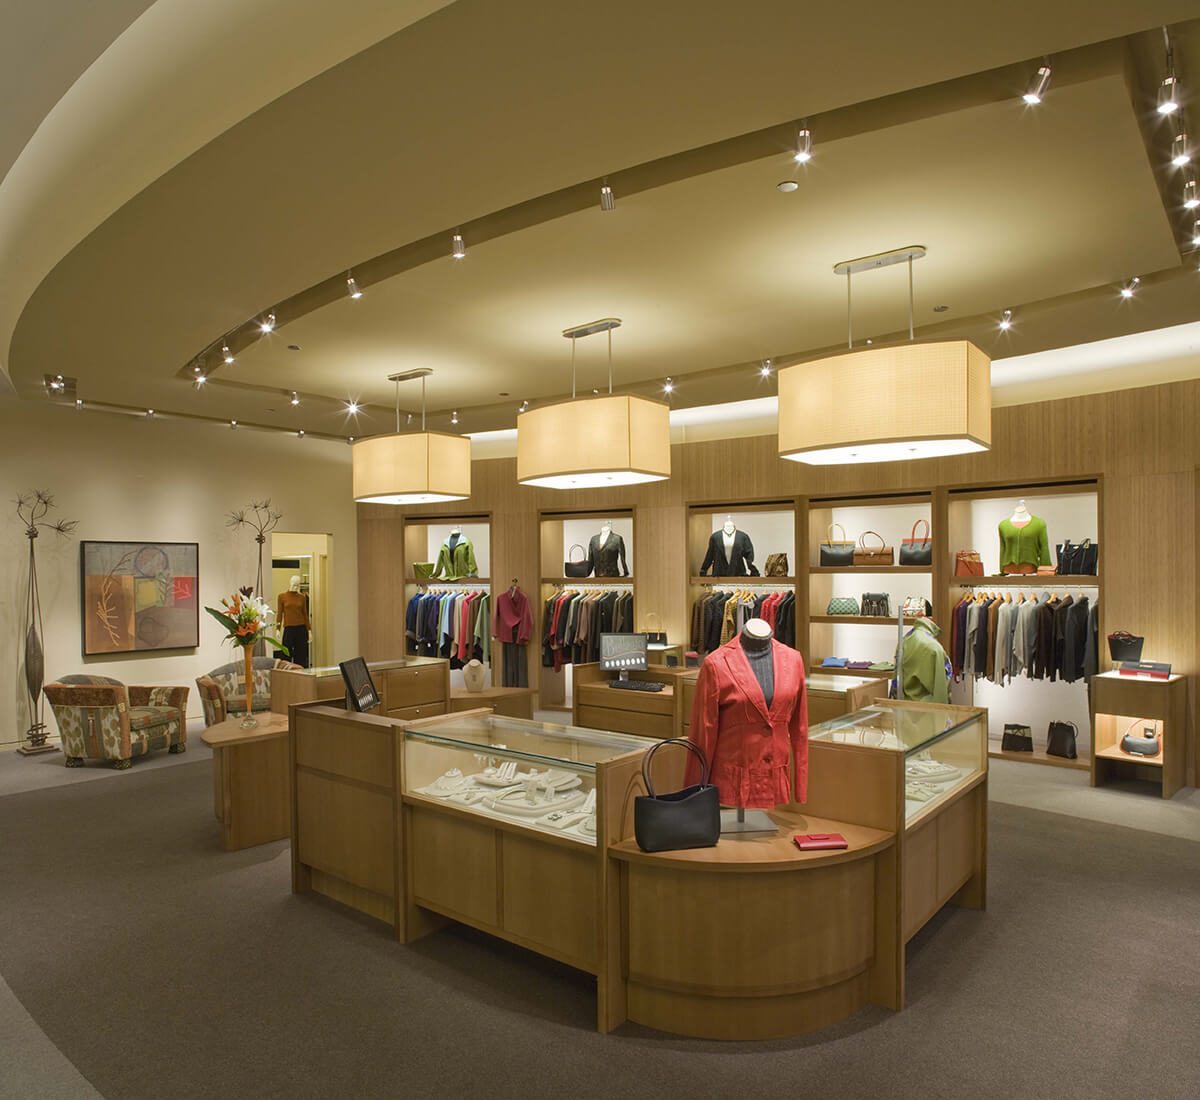 Bellagio Everyday retail store architectural renovation project